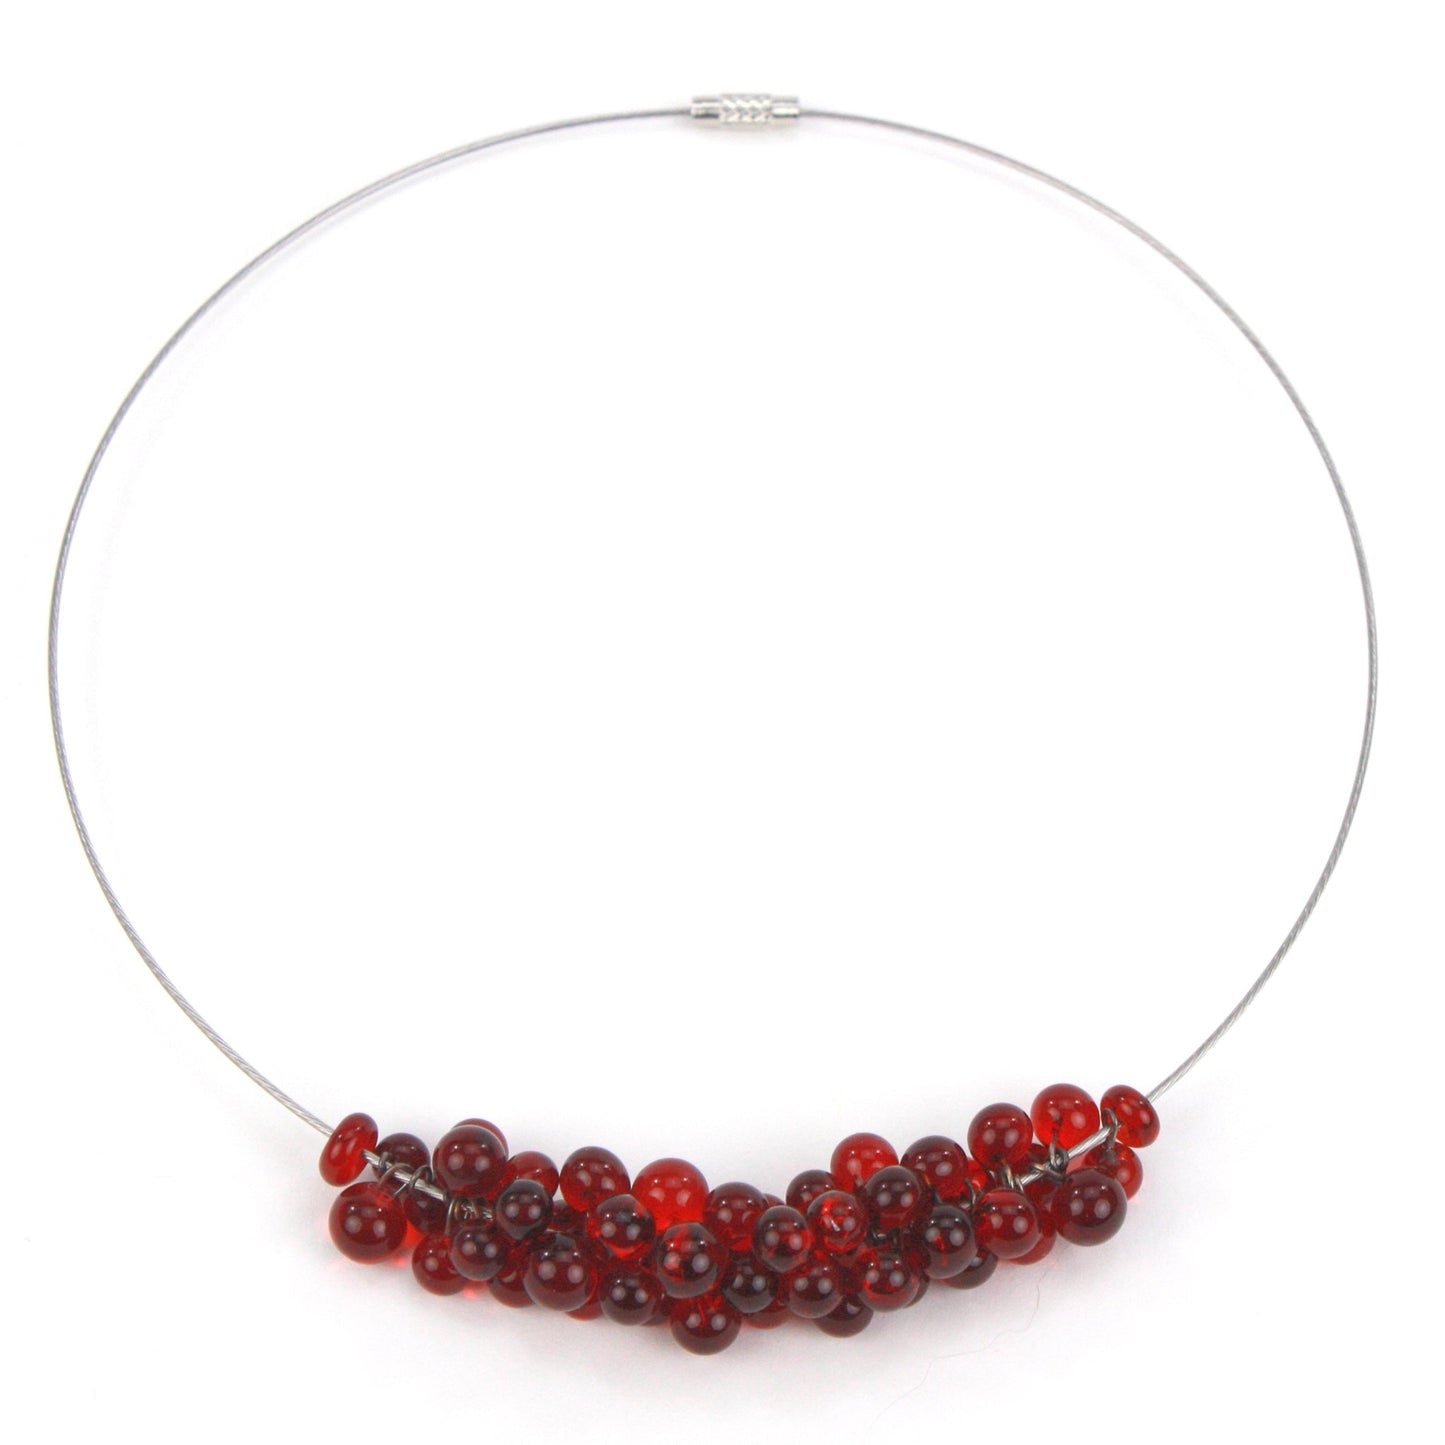 Petite Chroma Necklace in Red